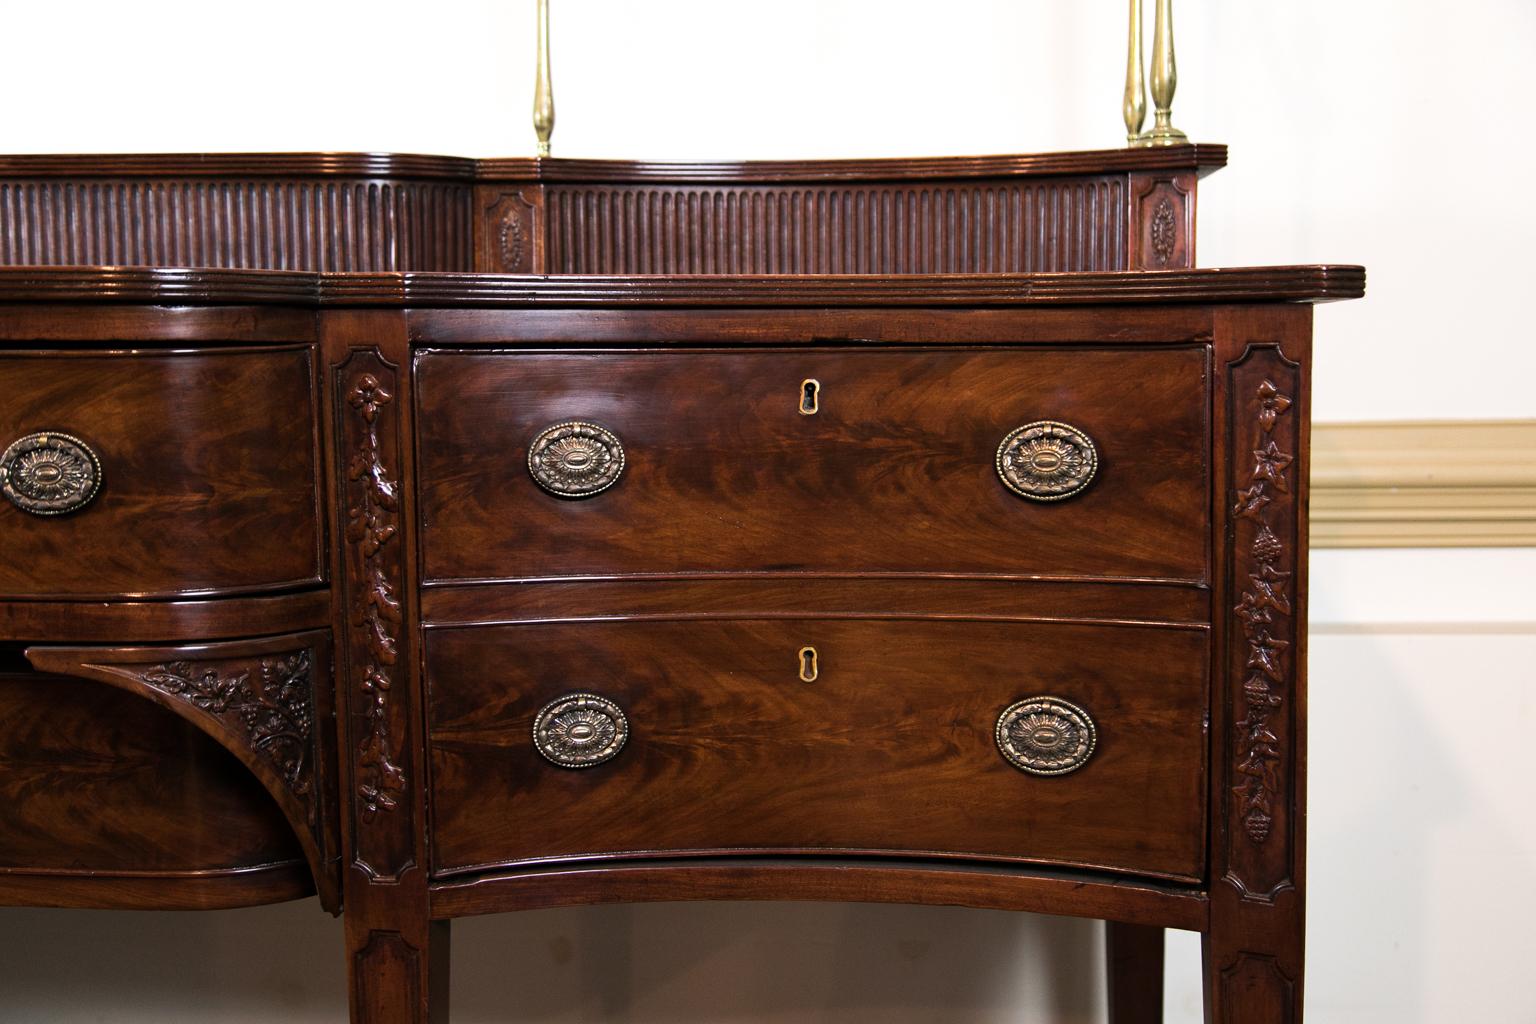 Carved Hepplewhite sideboard, with a sliding tambour plateau and a brass gallery. The front legs and center drawer are carved with oak leaves, acorns, and grapevines. The fronts are made of flame grained mahogany.
  